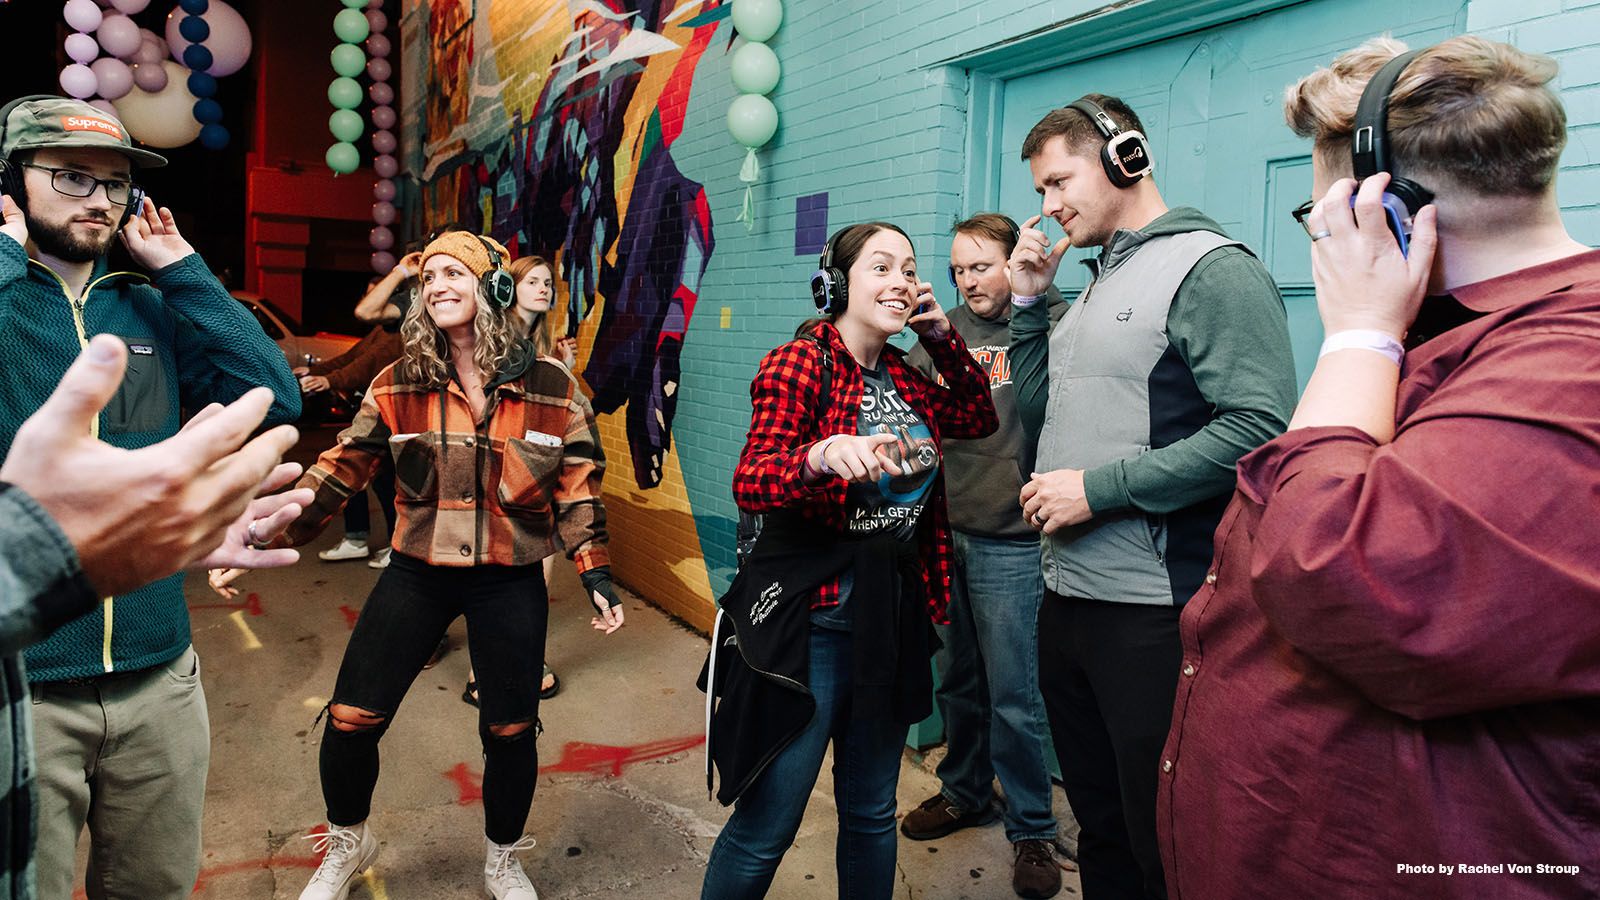 The silent disco will be one of the many attractions at Art Crawl: Alley Bash on Sept. 22 in downtown Fort Wayne.